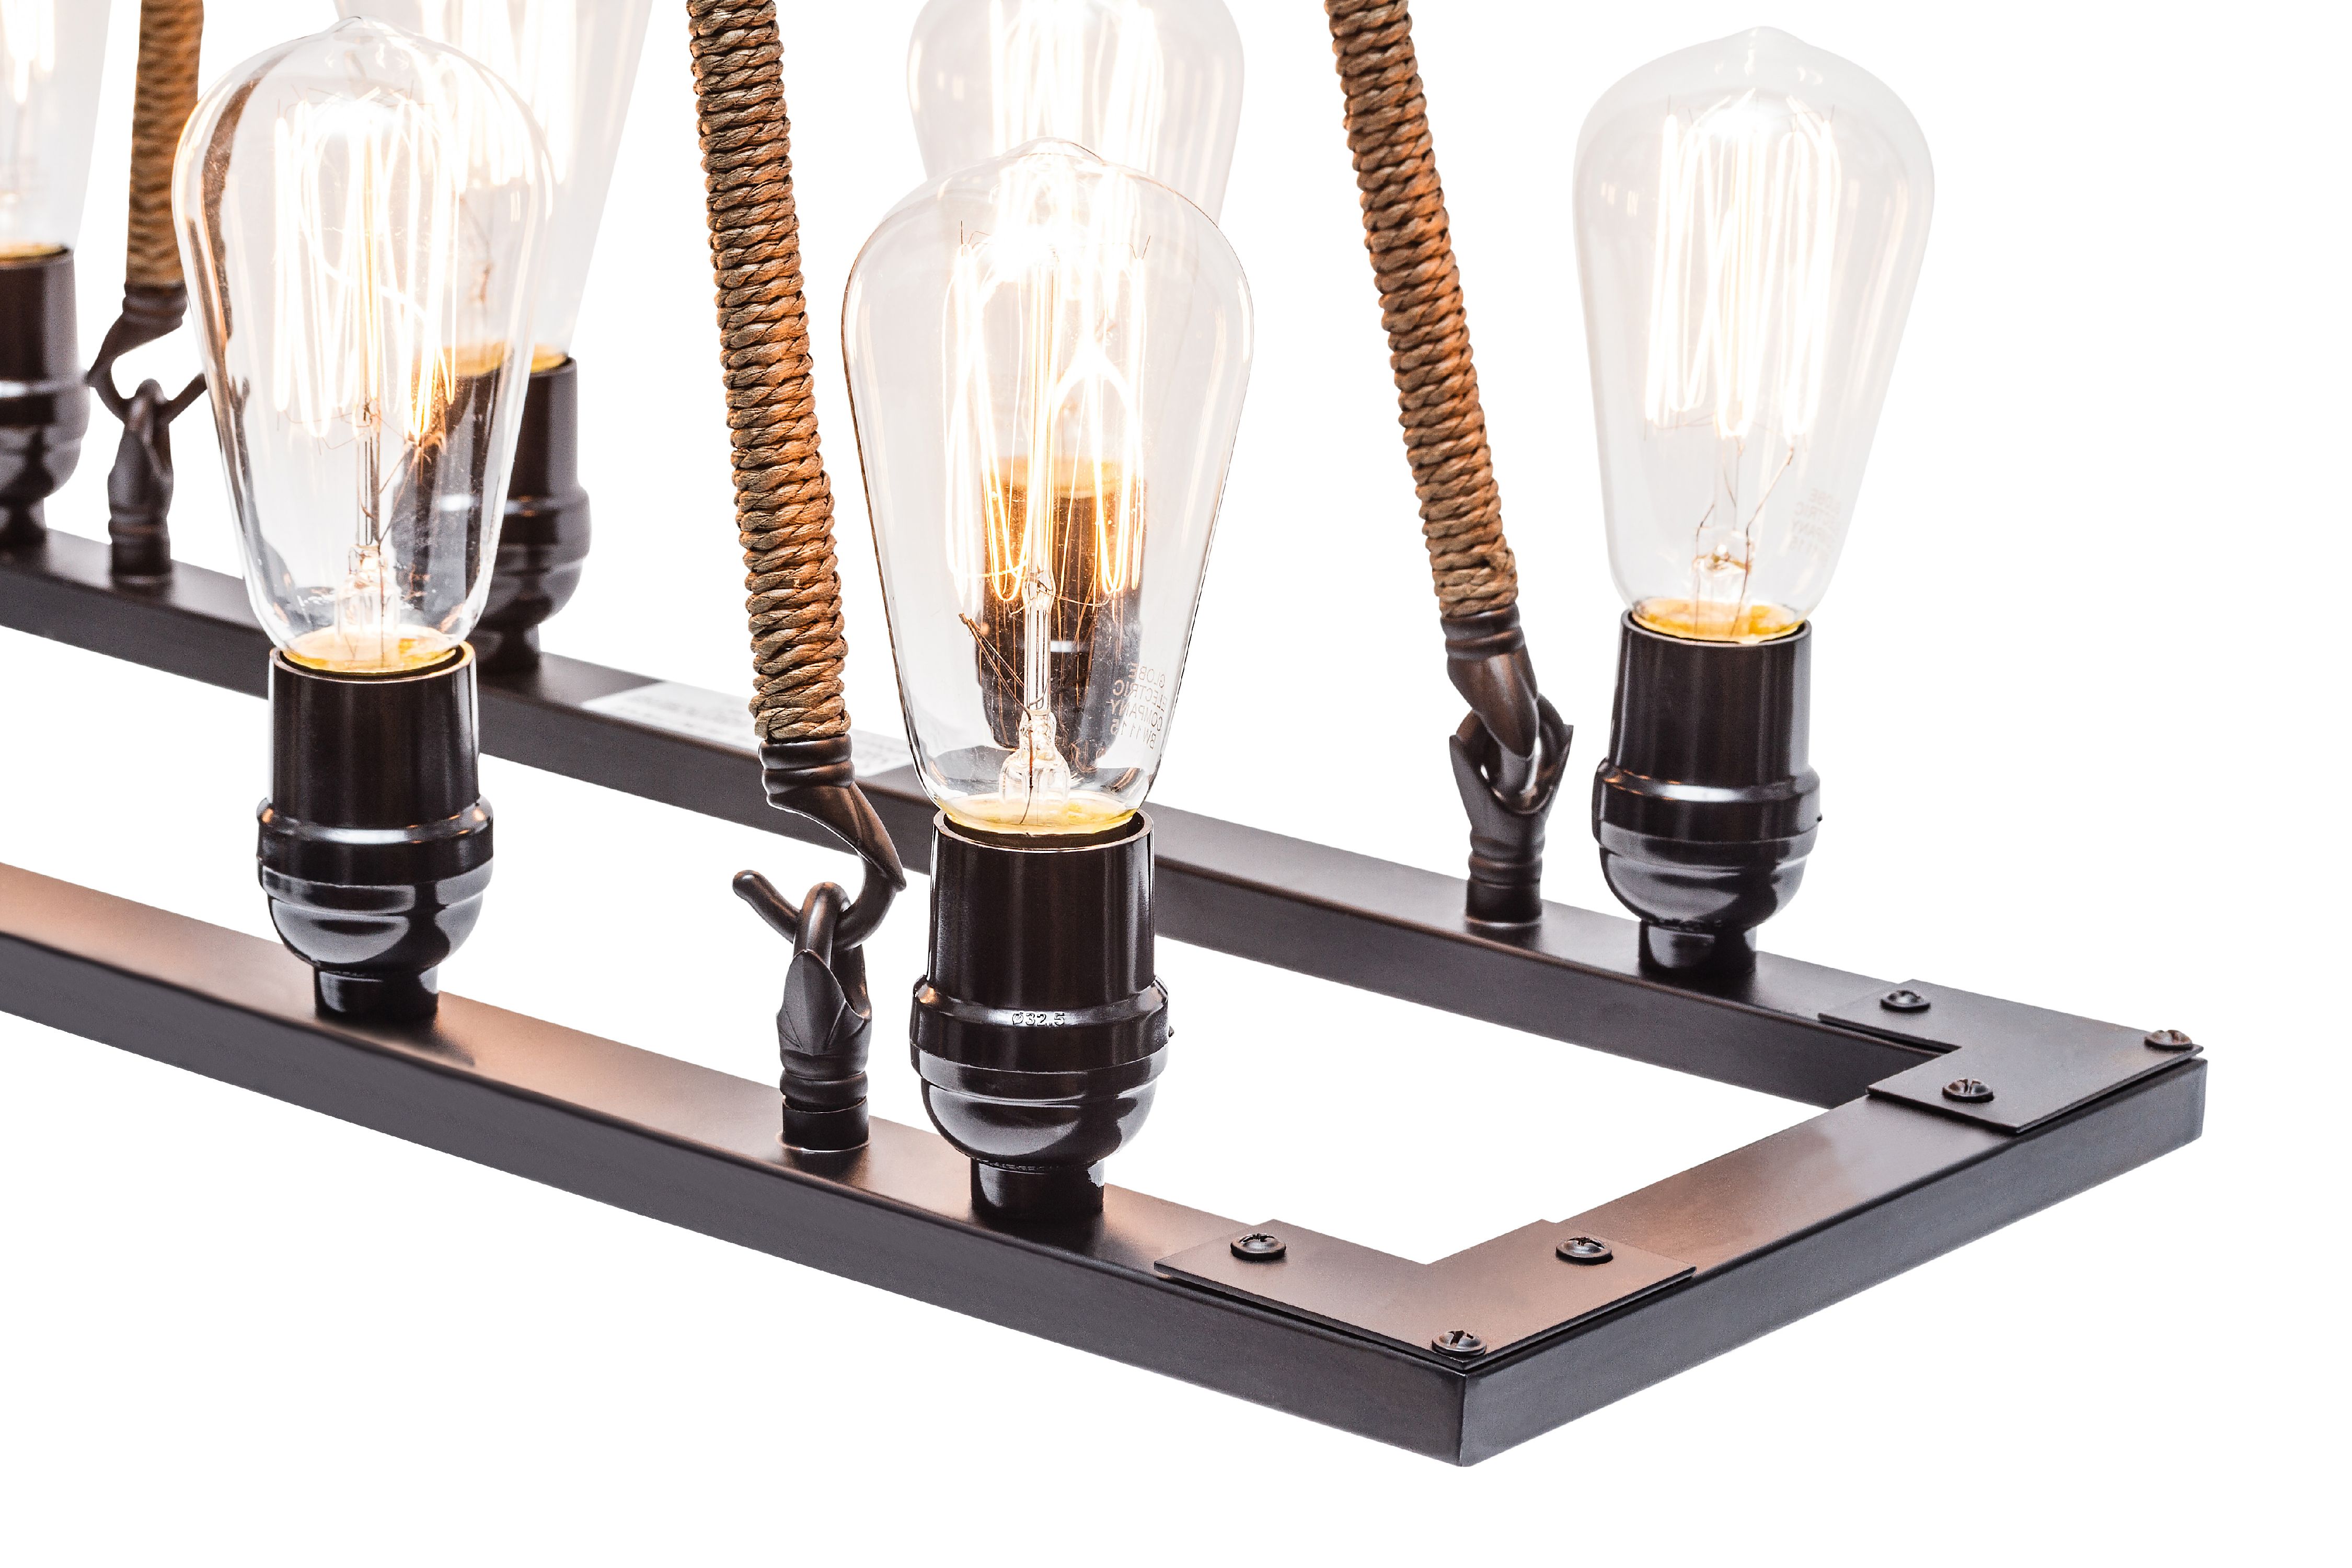 Globe Electric 8-Light Oil Rubbed Bronze Twine Wrapped Vintage Chandelier, 65038 - image 2 of 3